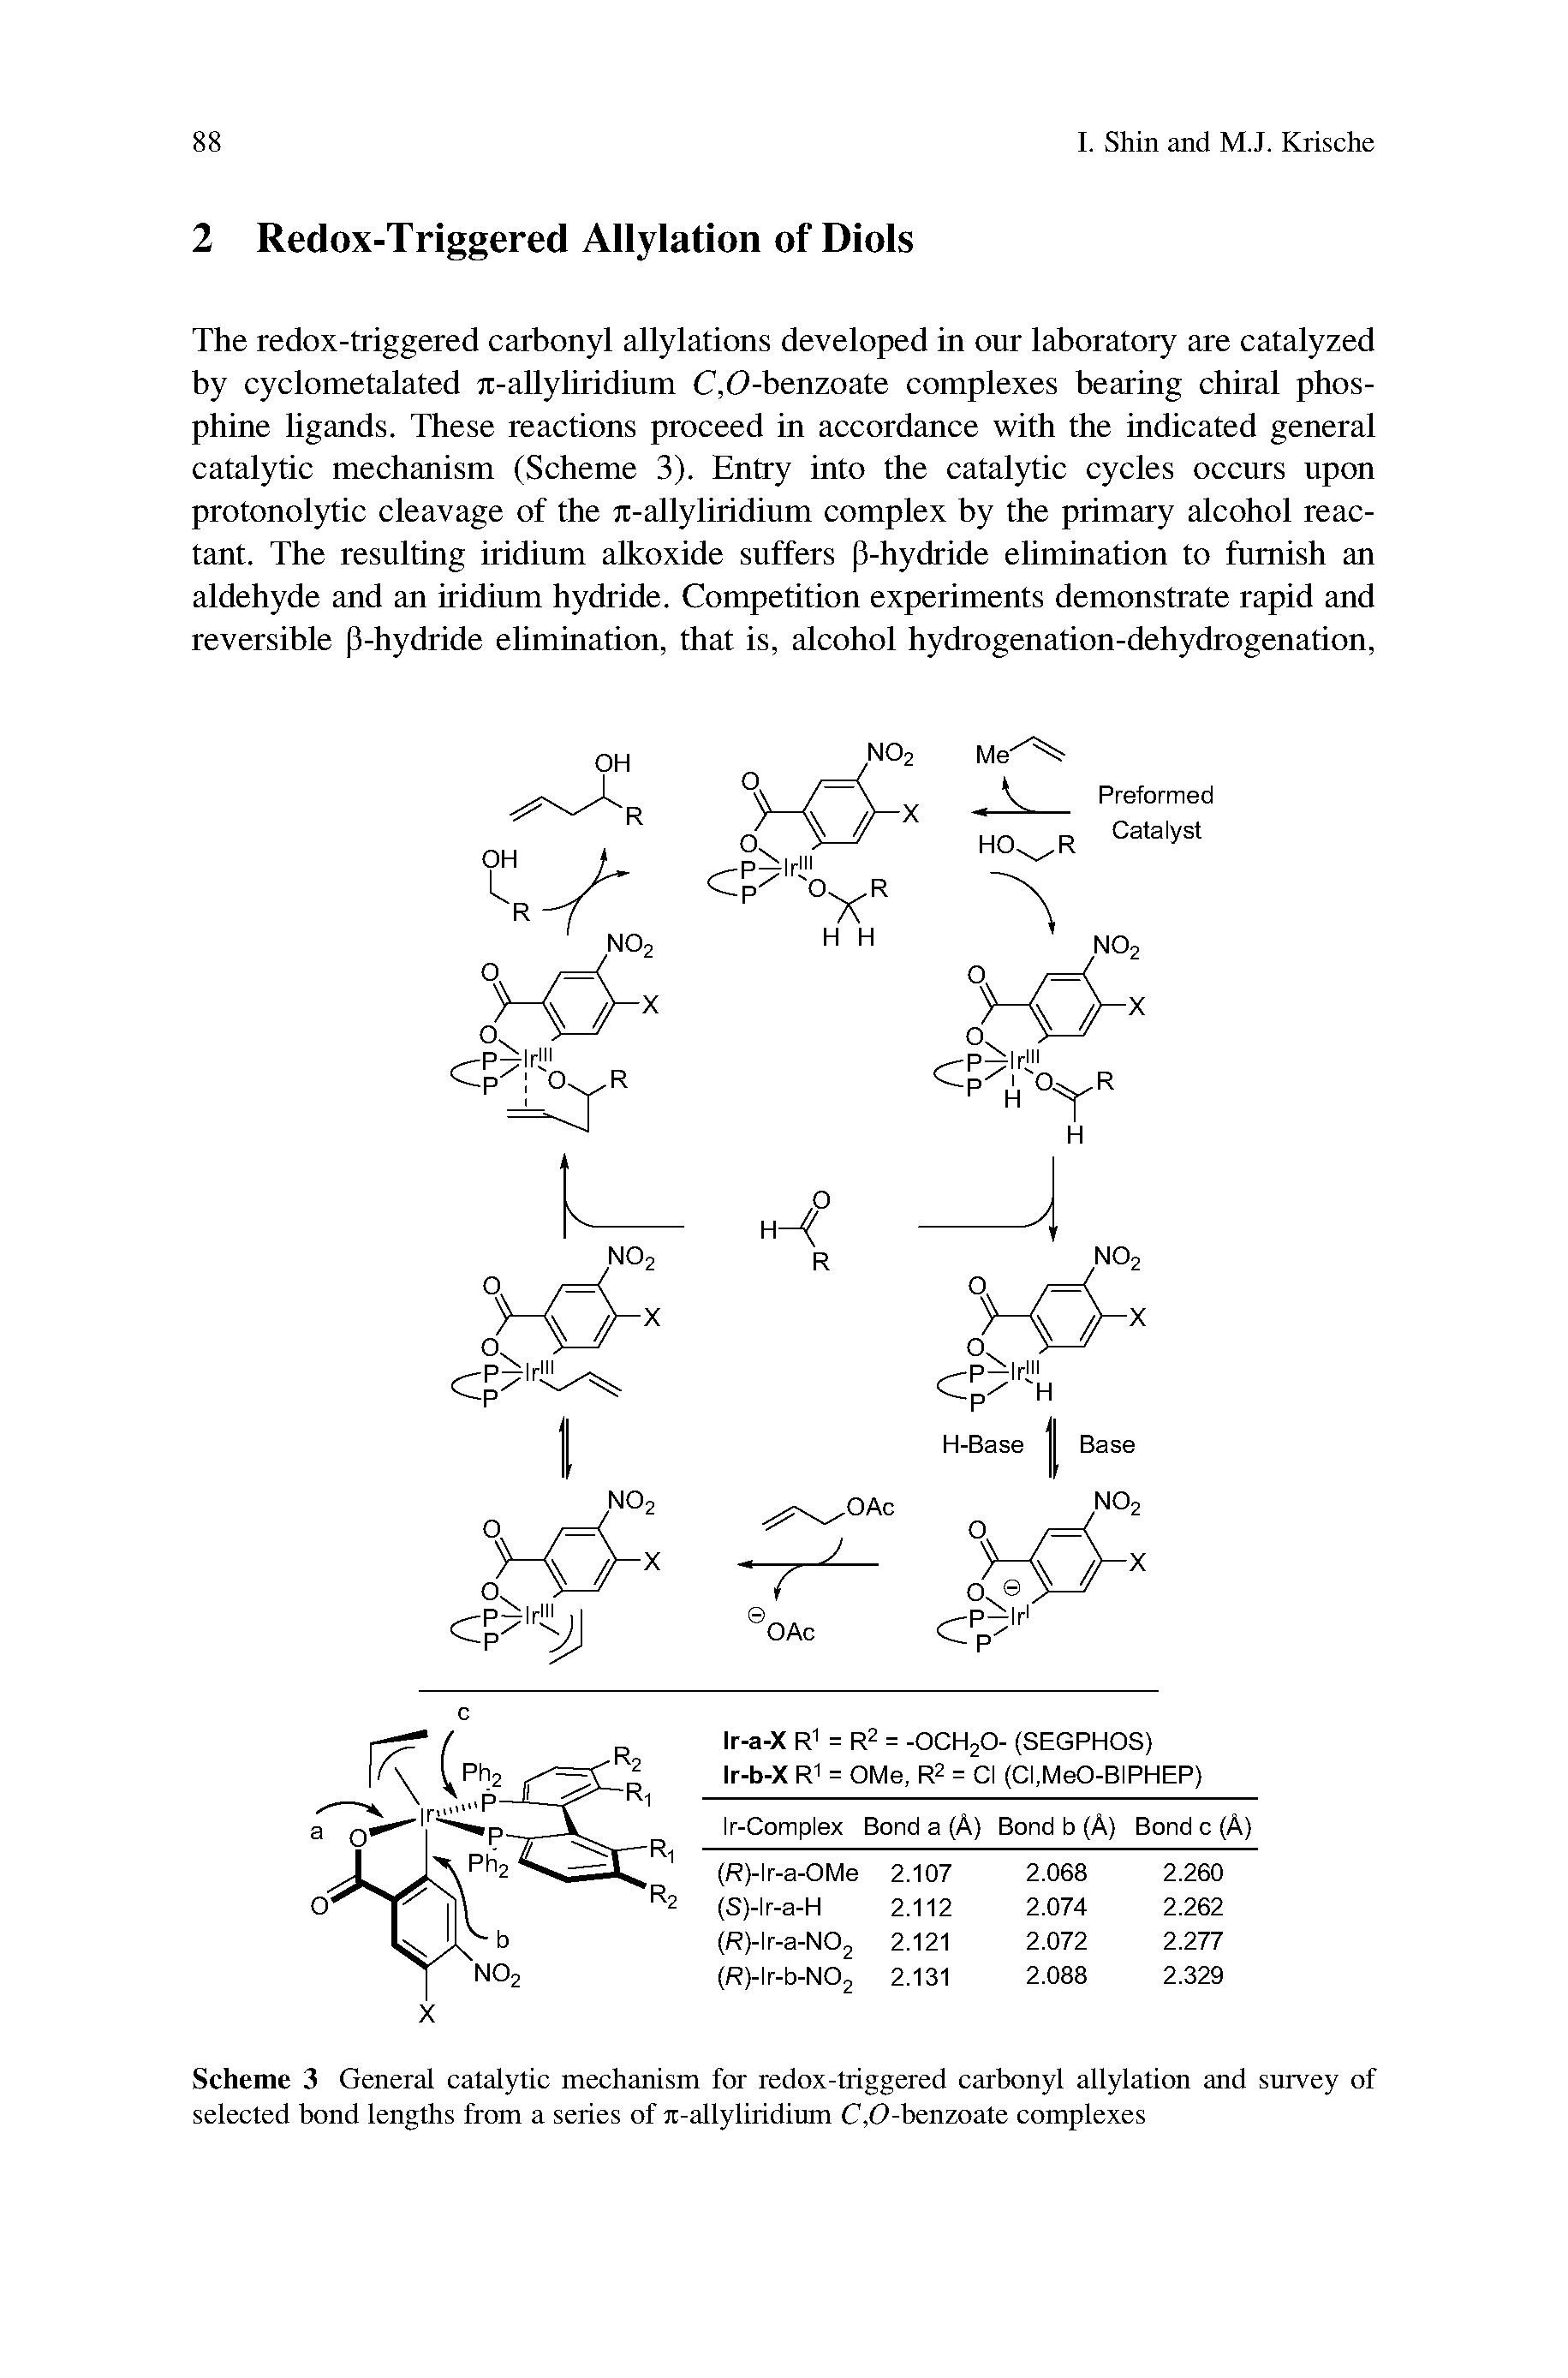 Scheme 3 General catalytic mechanism for redox-triggered carbonyl allylation and survey of selected bond lengths from a series of it-allyliridium C,0-benzoate complexes...